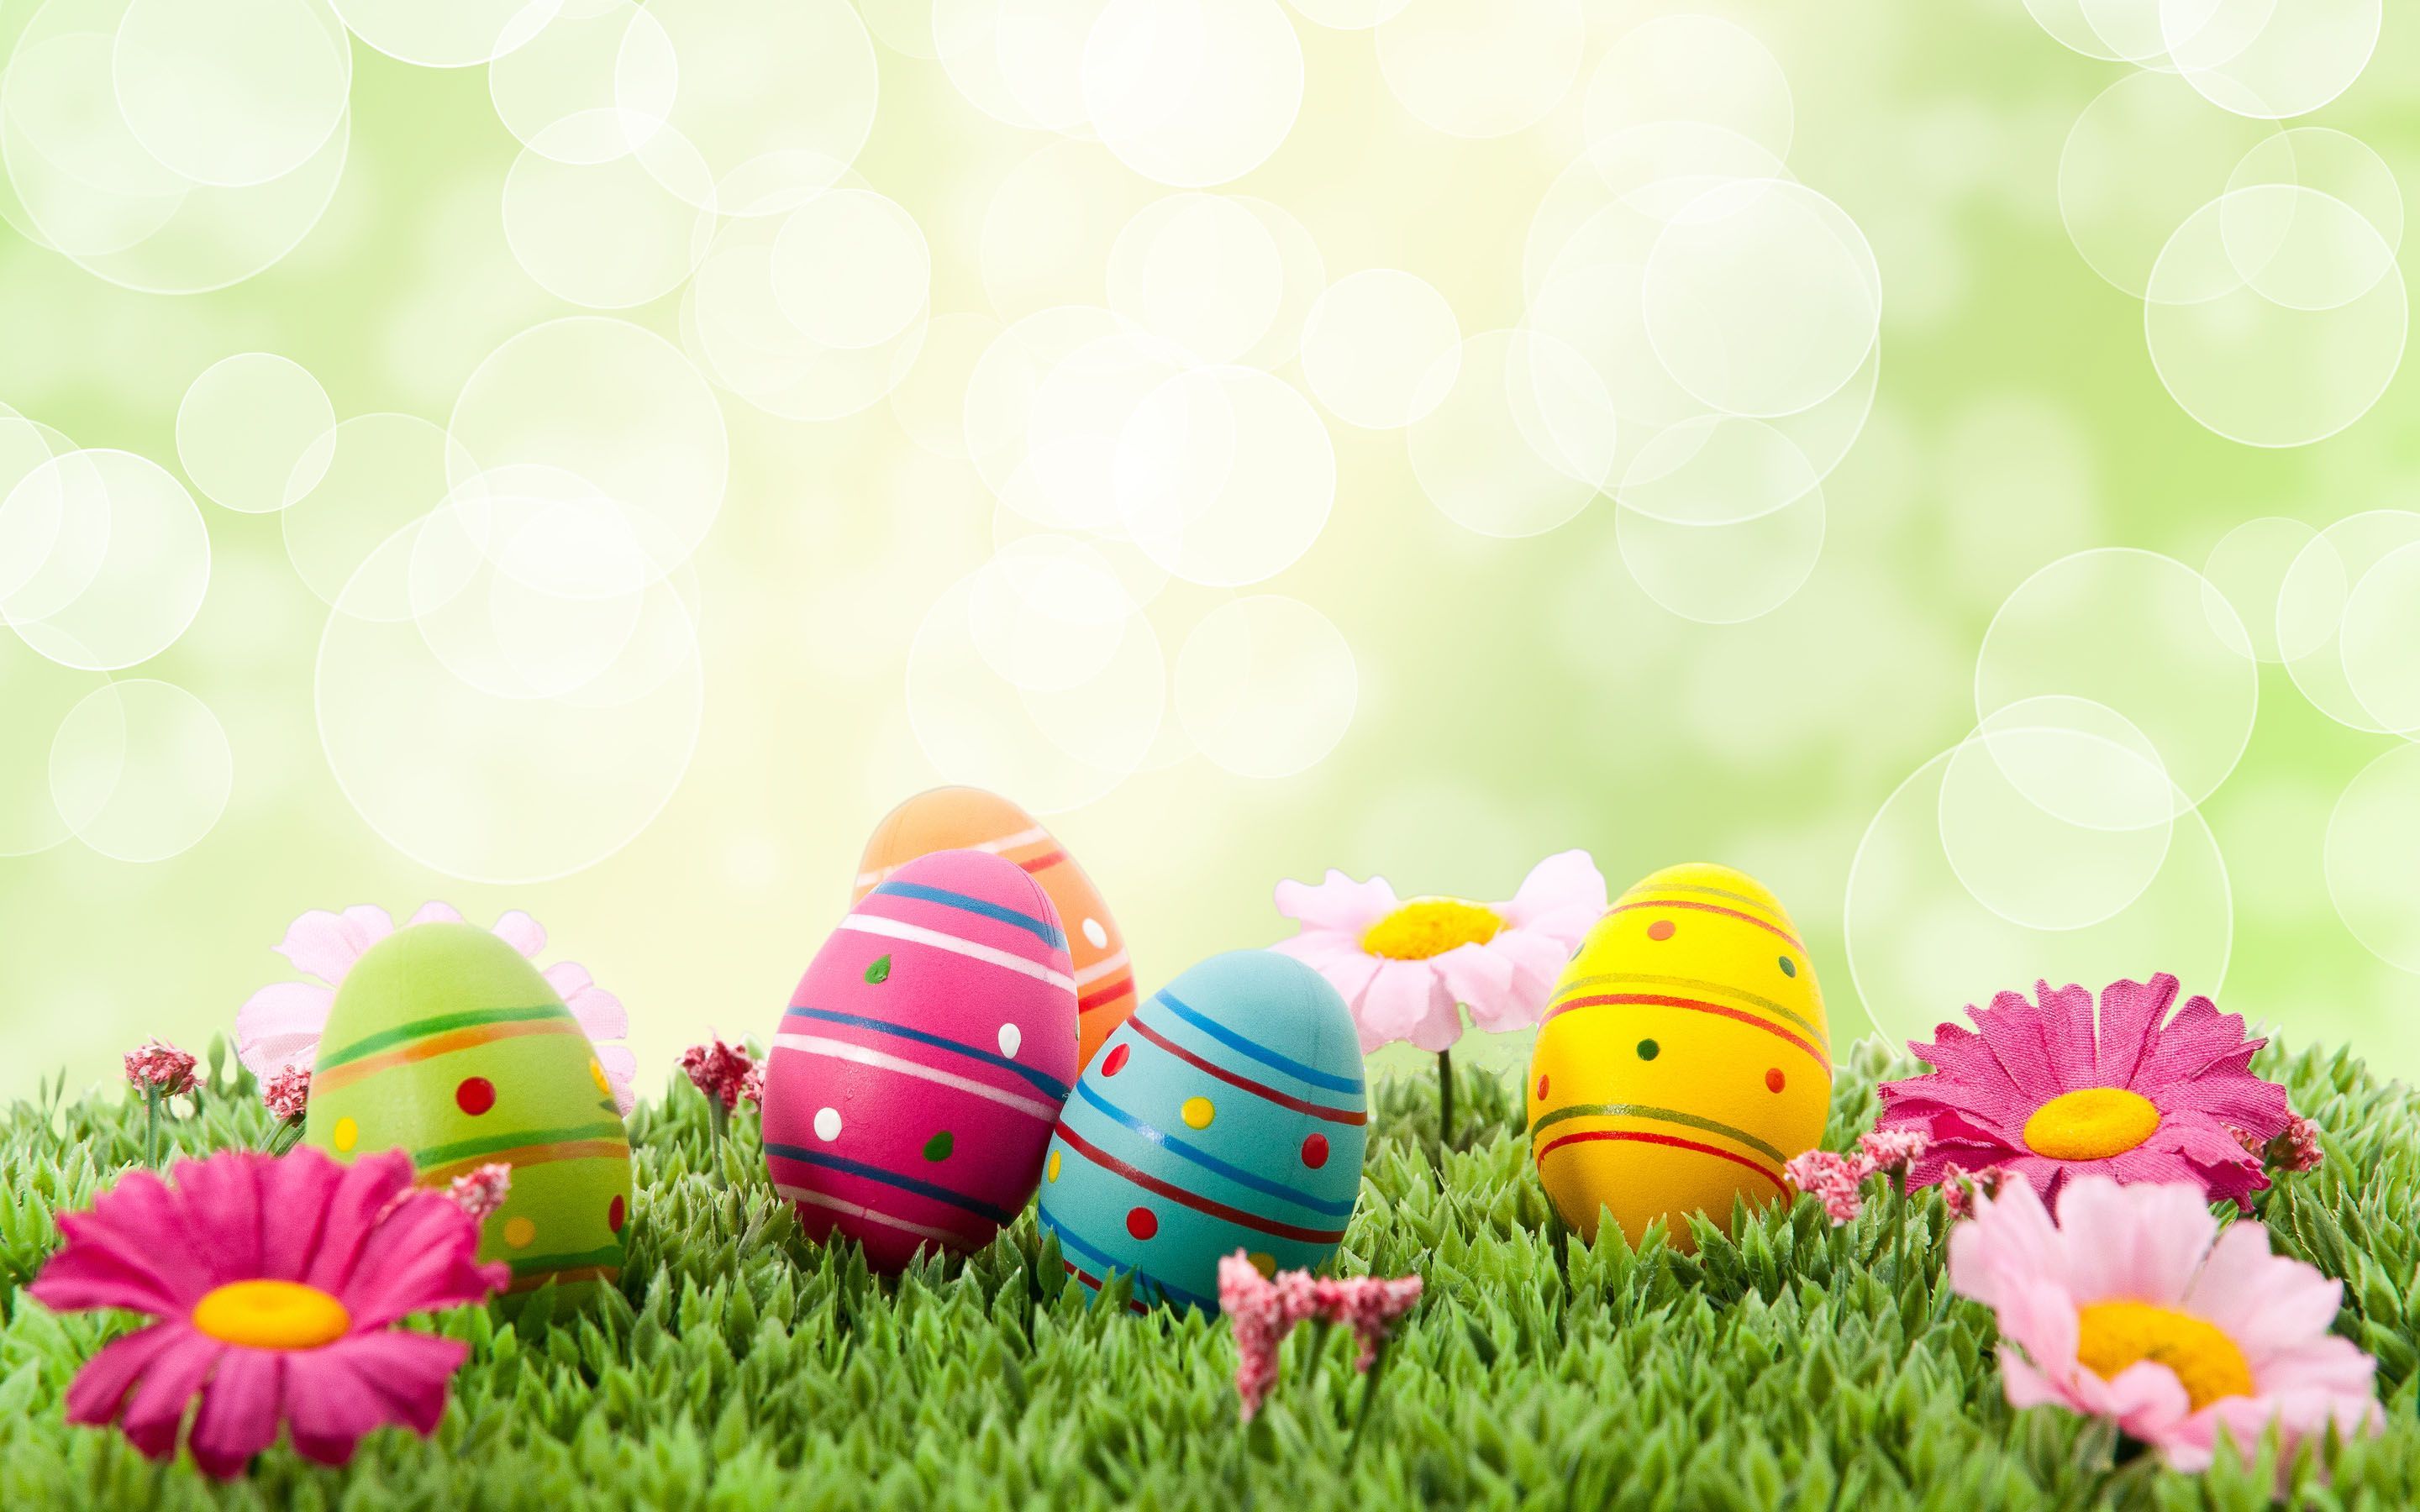 BEAUTIFUL EASTER WALLPAPER FREE TO DOWNLOAD. Happy easter